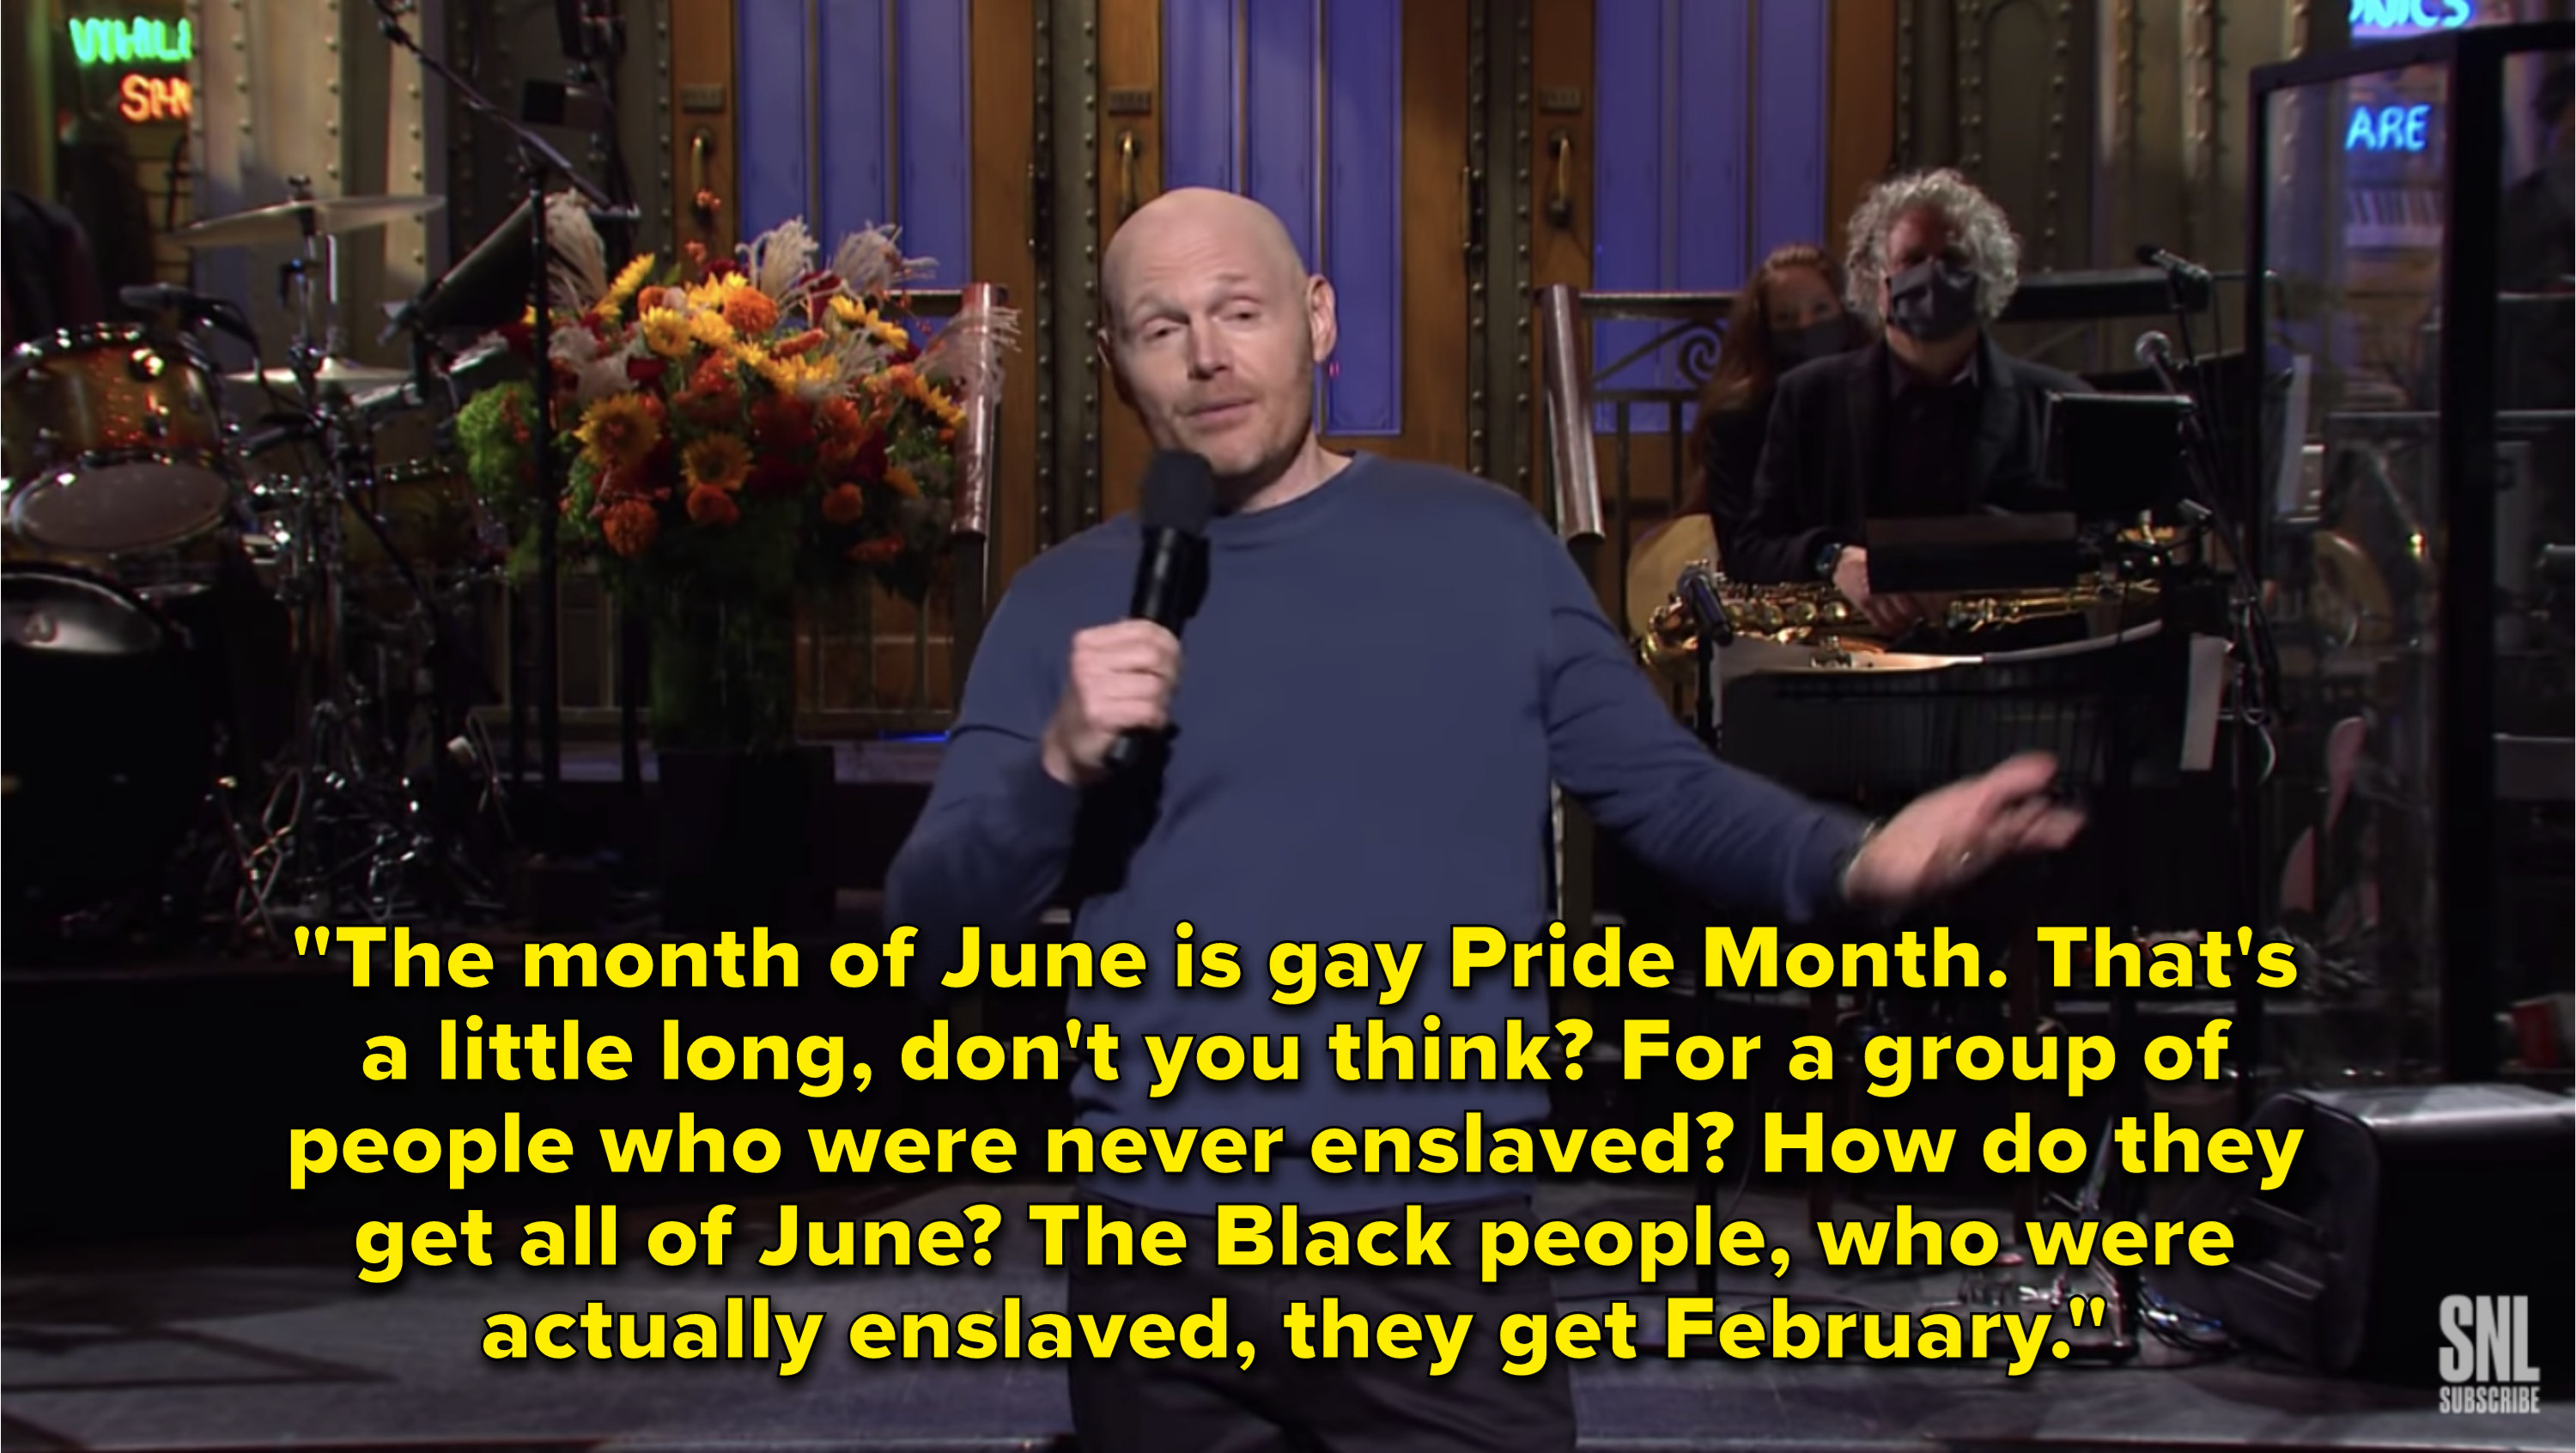 Bill saying, &quot;The month of June is gay Pride month. That&#x27;s a little long, don&#x27;t you think? For a group of people who were never enslaved. How do they get all of June? The Black people, who were actually enslaved, they get February.&quot;